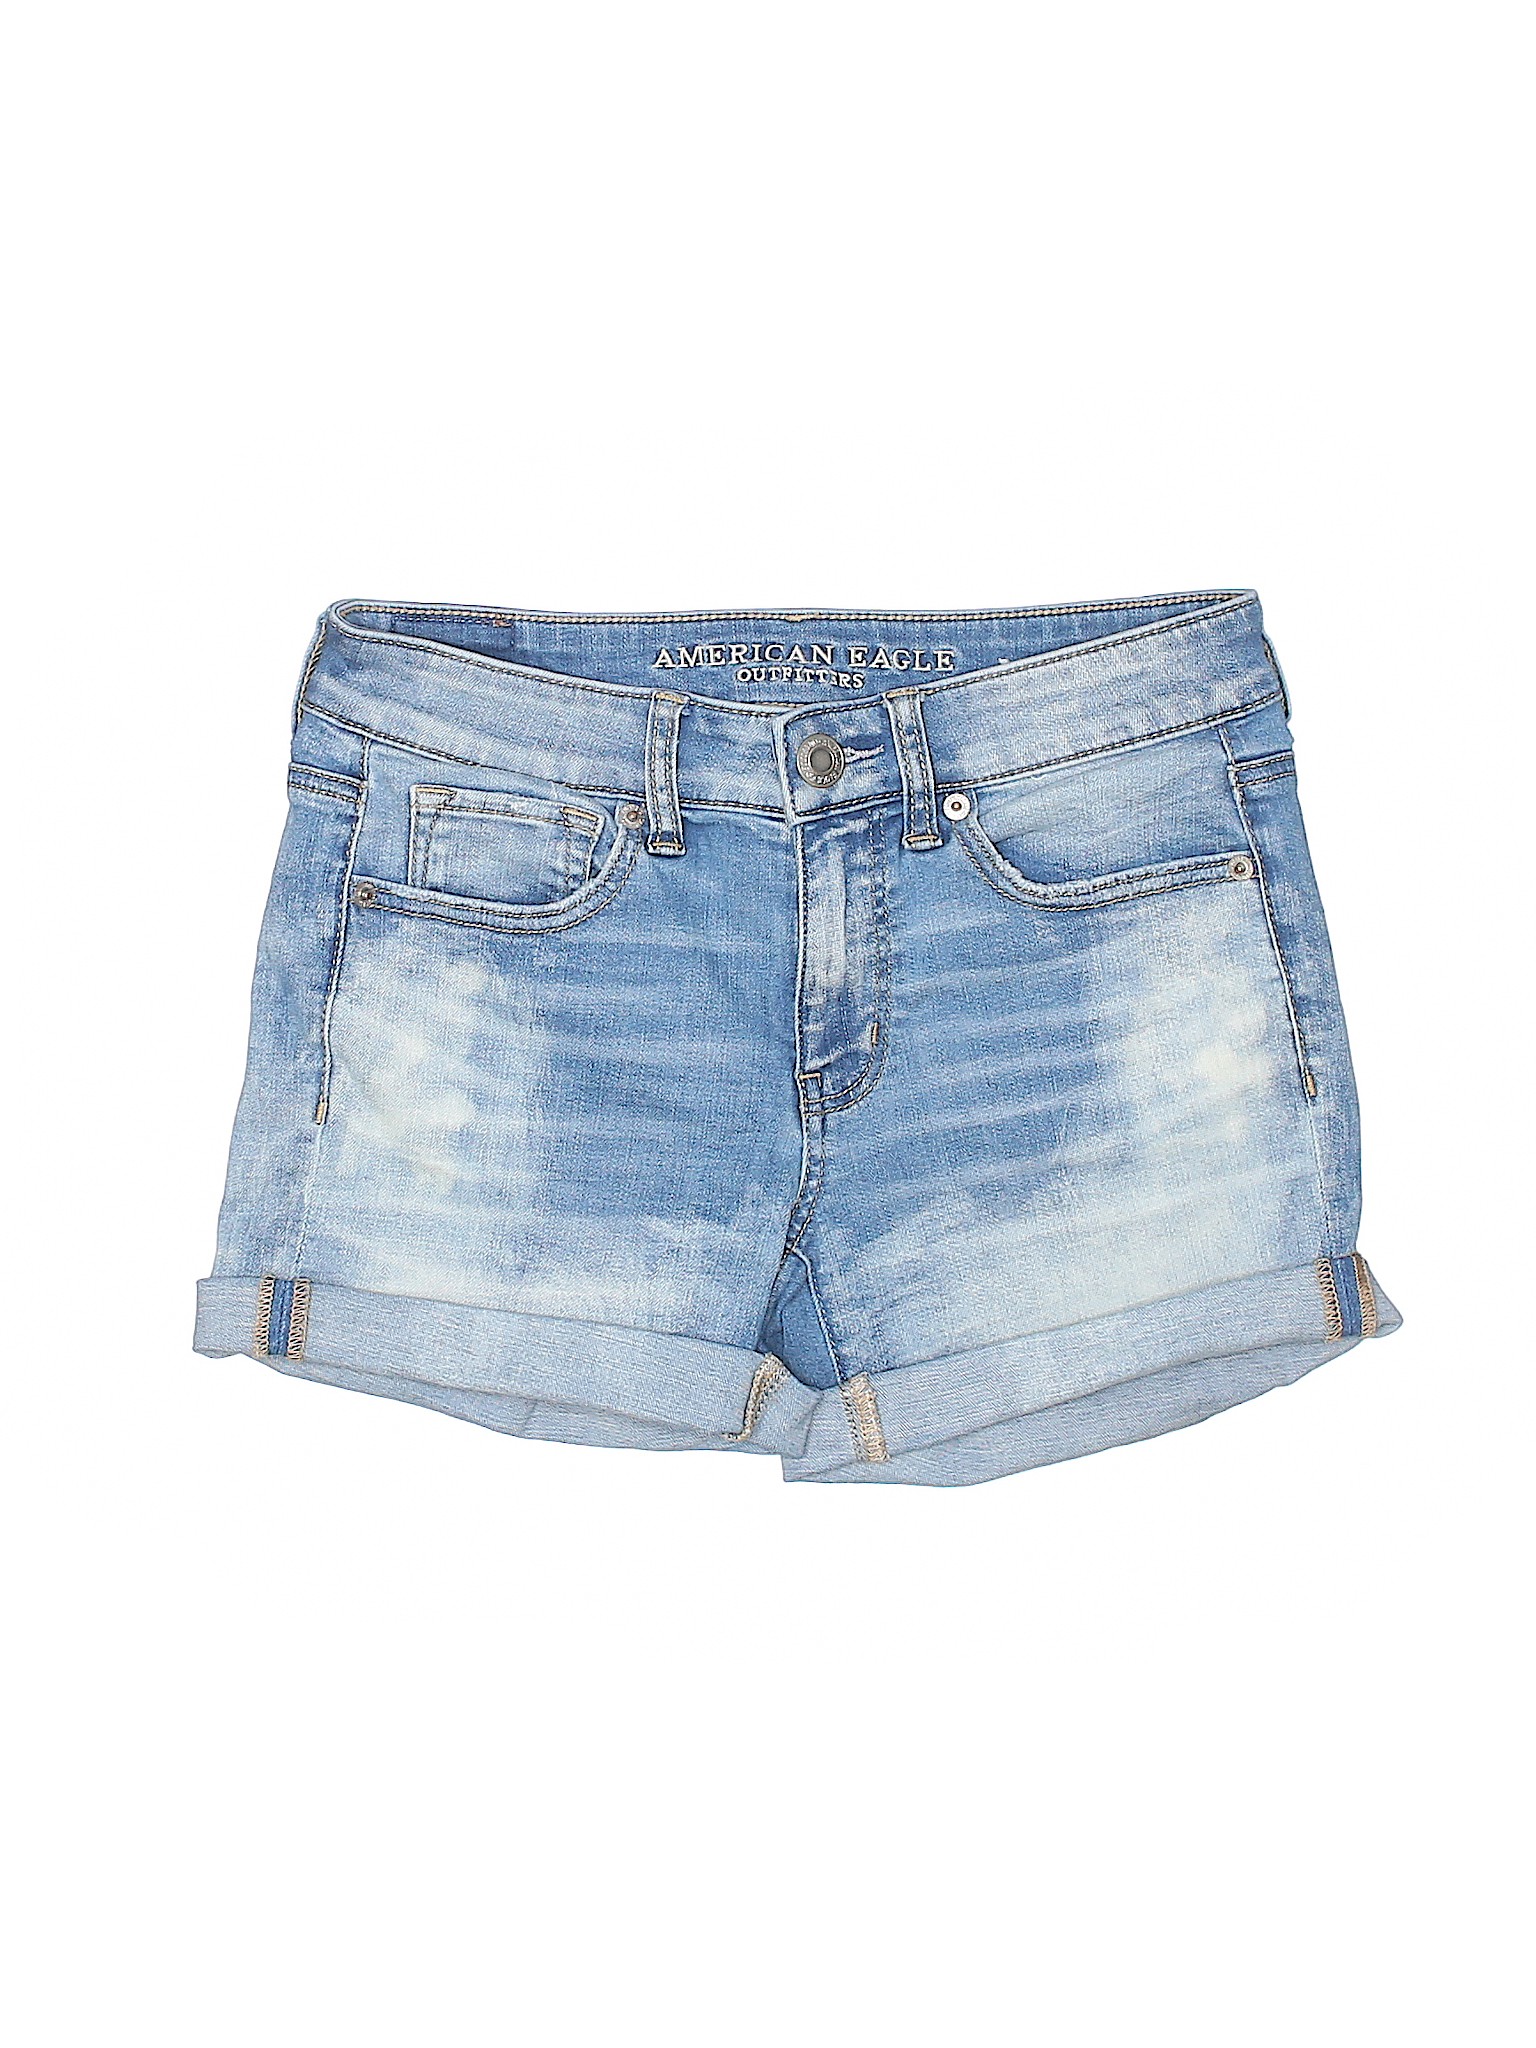 American Eagle Outfitters Solid Blue Denim Shorts Size 4 - 62% off ...